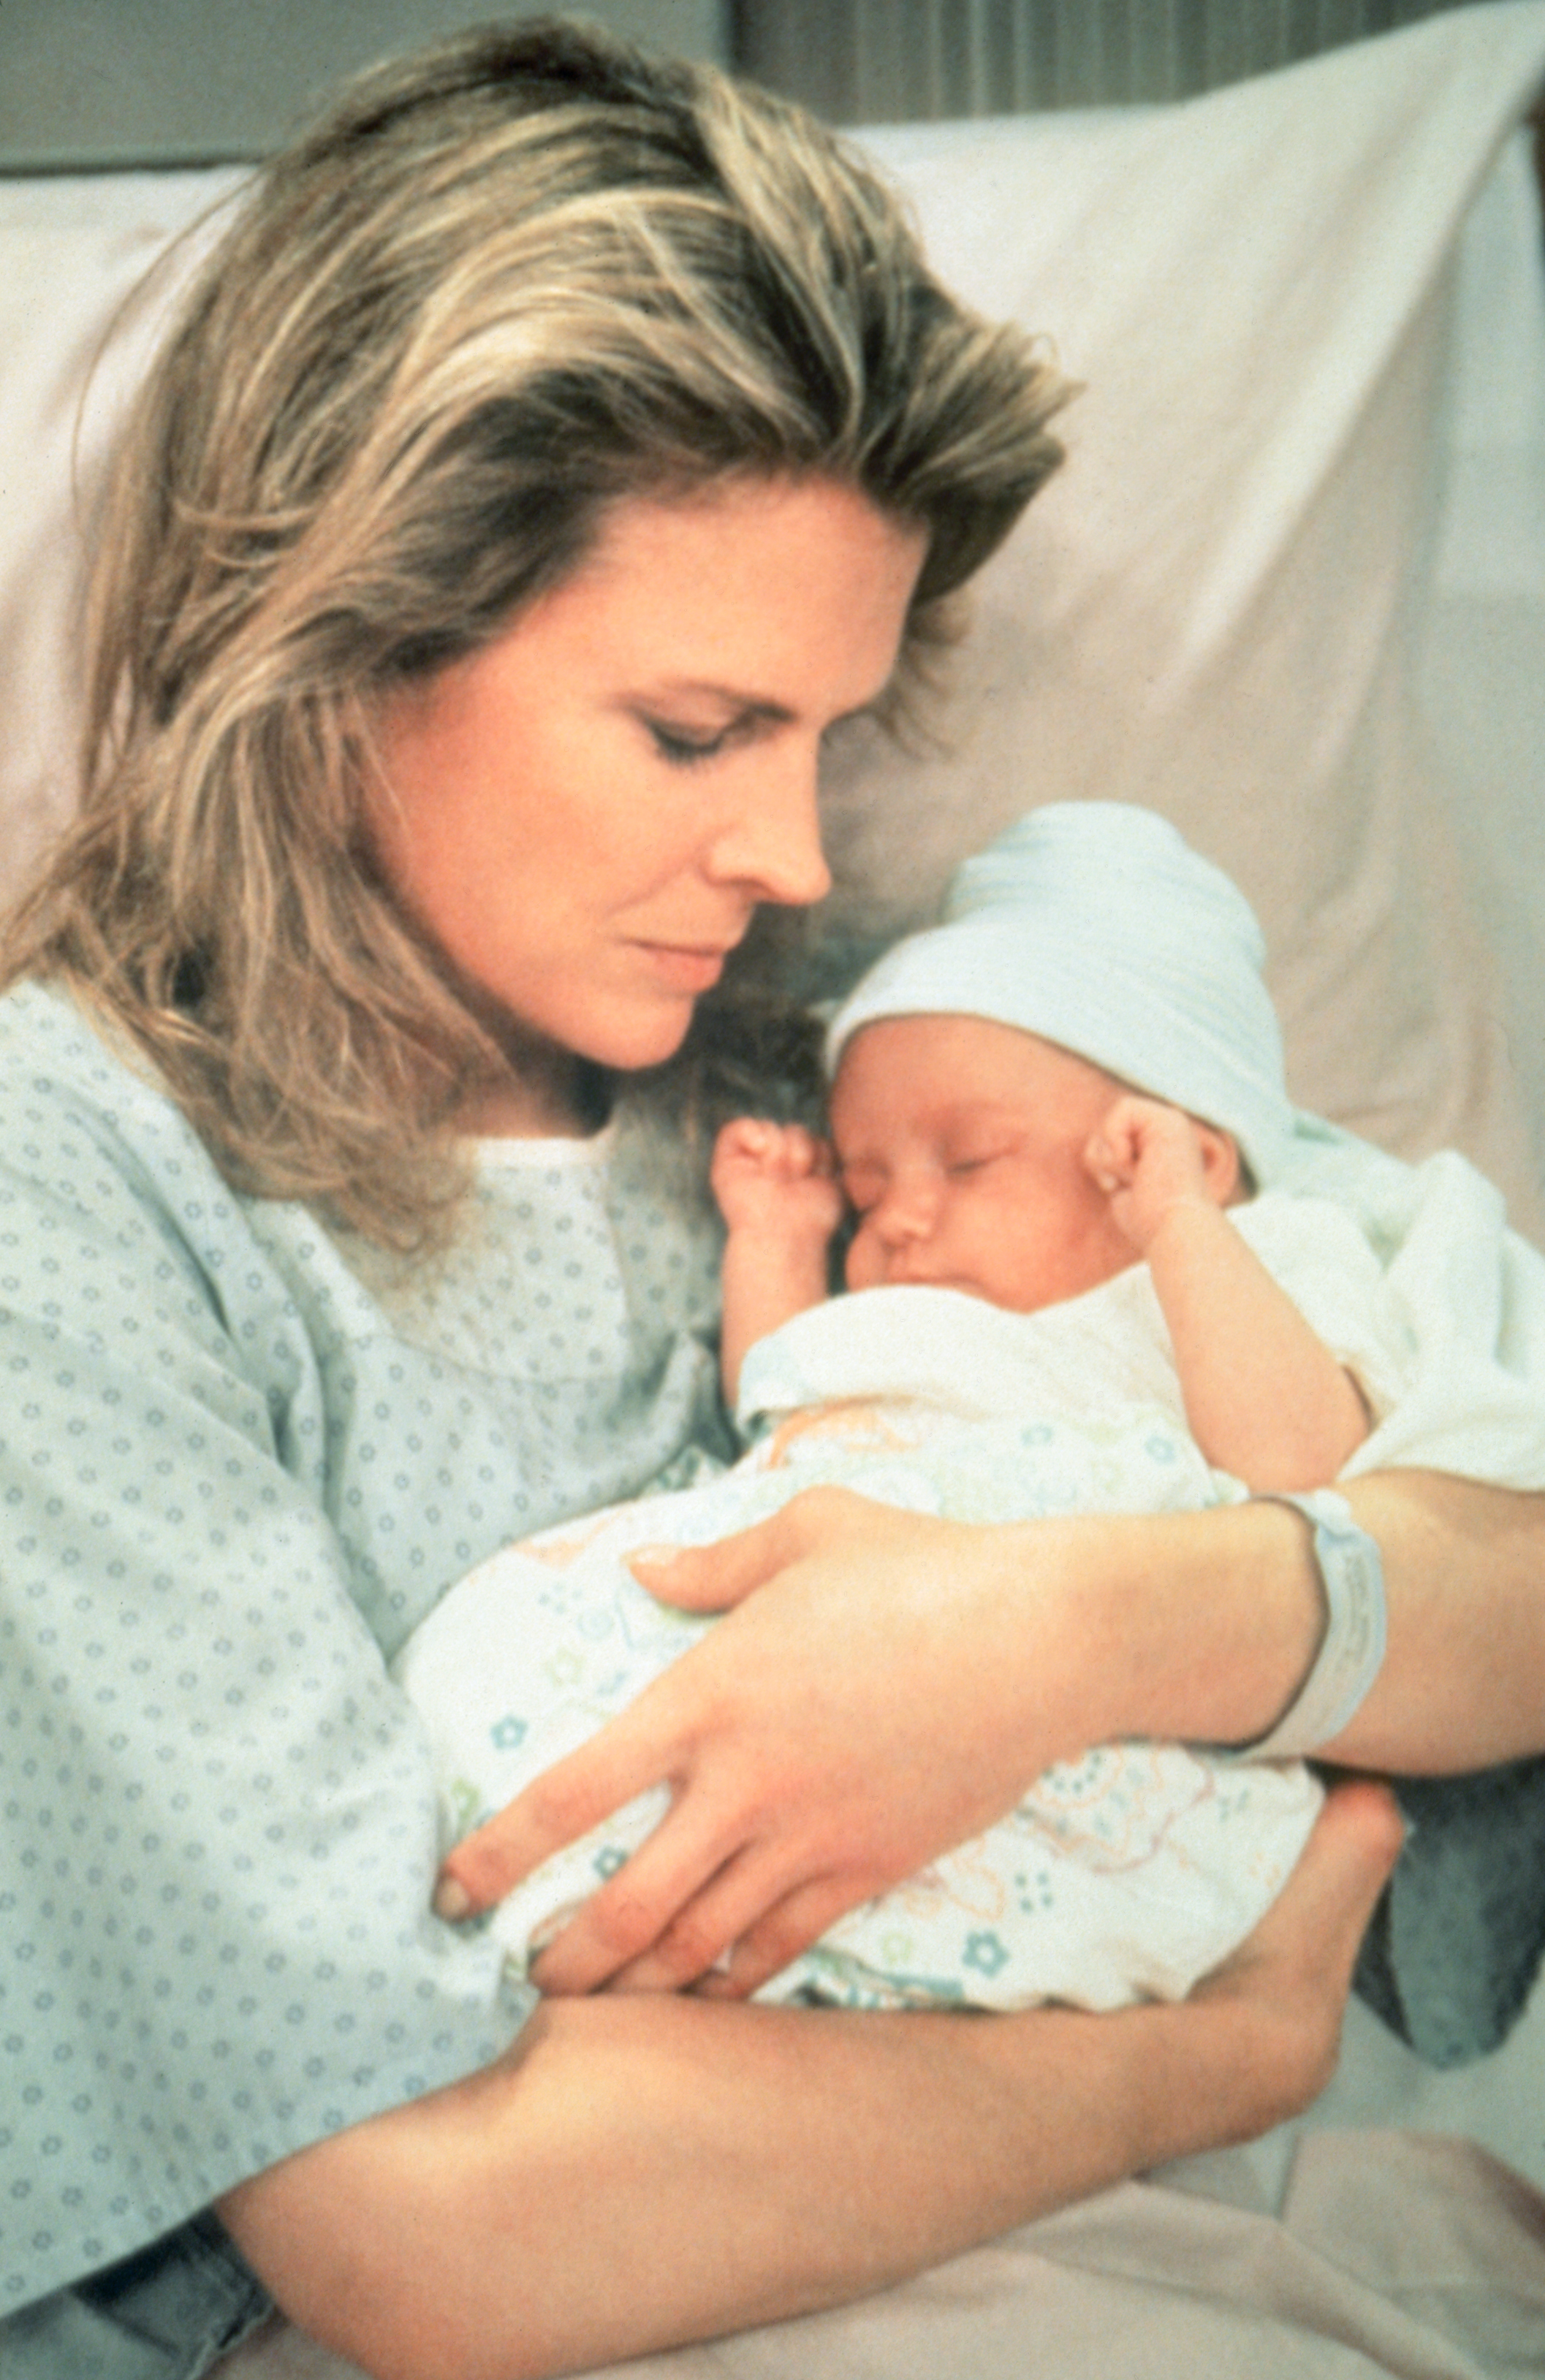 Murphy Brown, played by Candice Bergen, holds her newborn son Avery on the television show "Murphy Brown" | Source: Getty Images